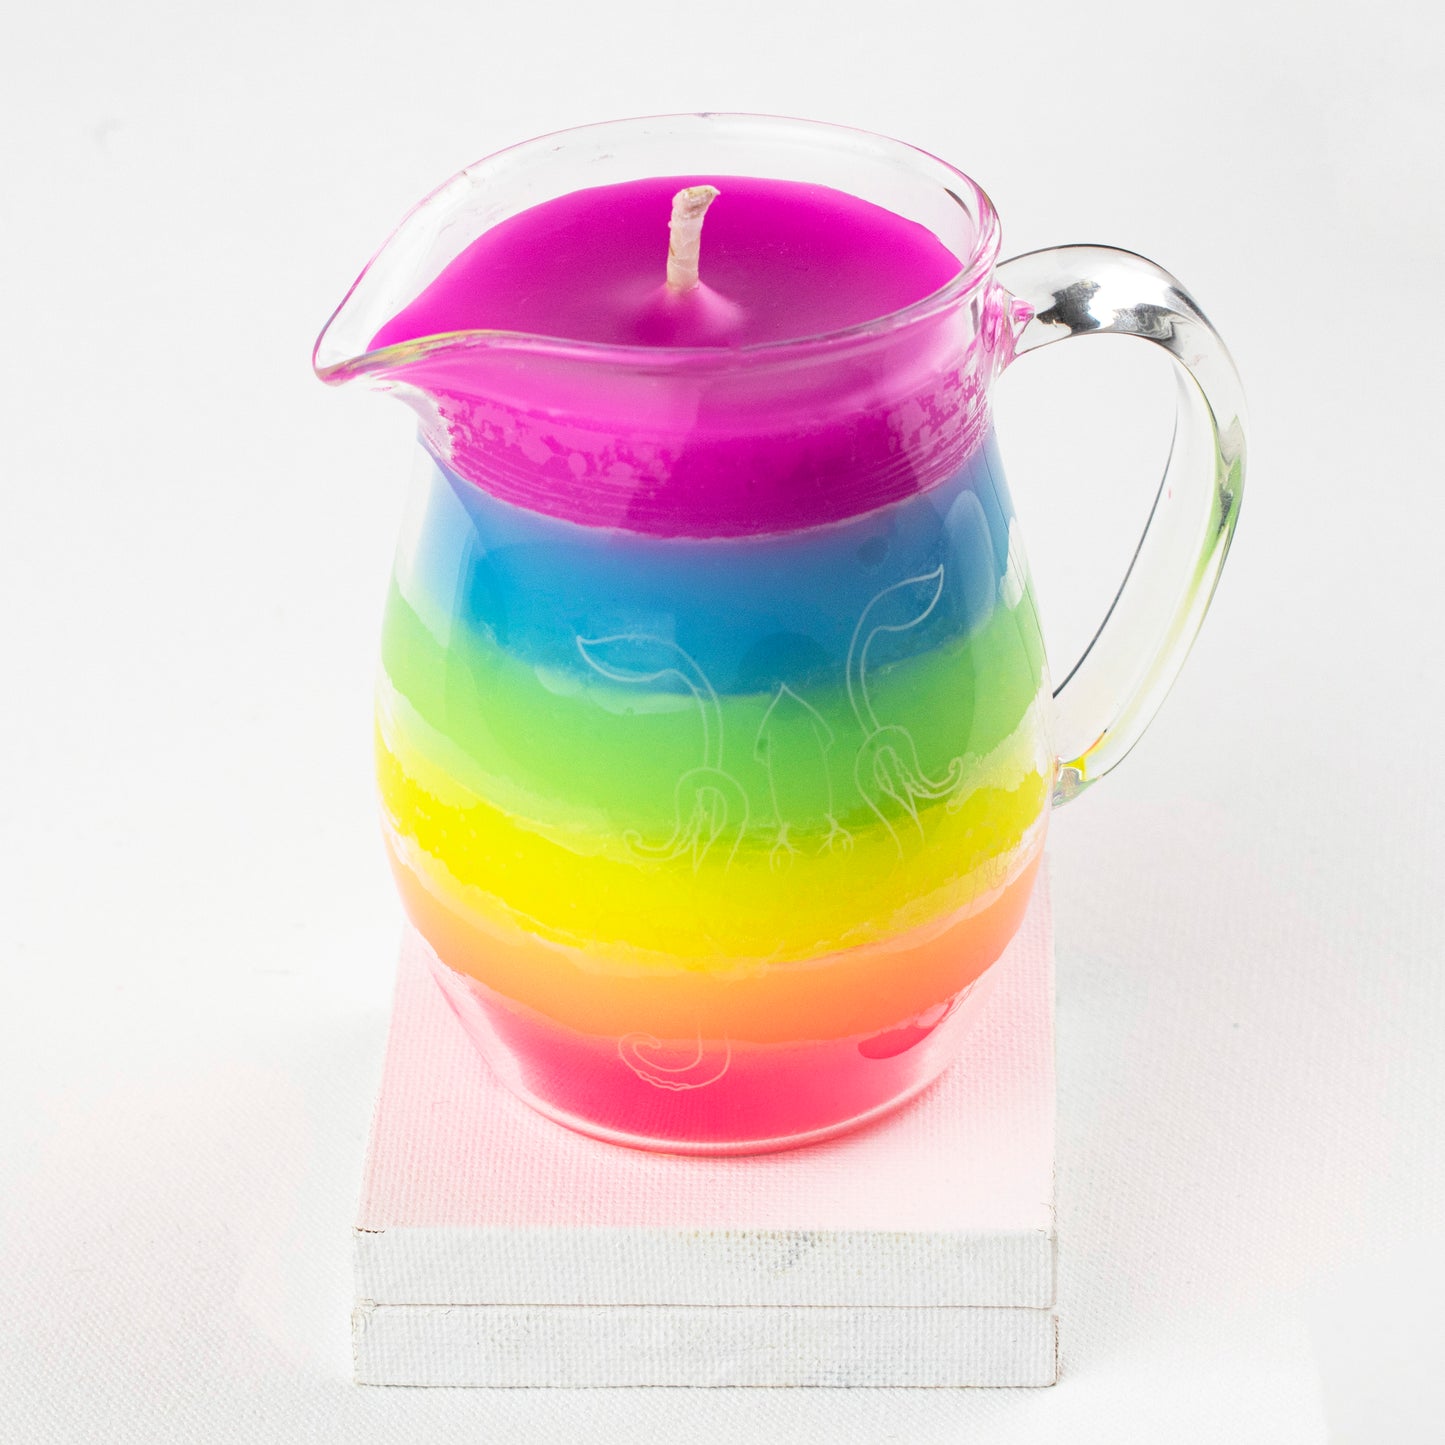 Classic Wax Play Pitcher Candle - Lav temperatur - Uparfymert - Parafin